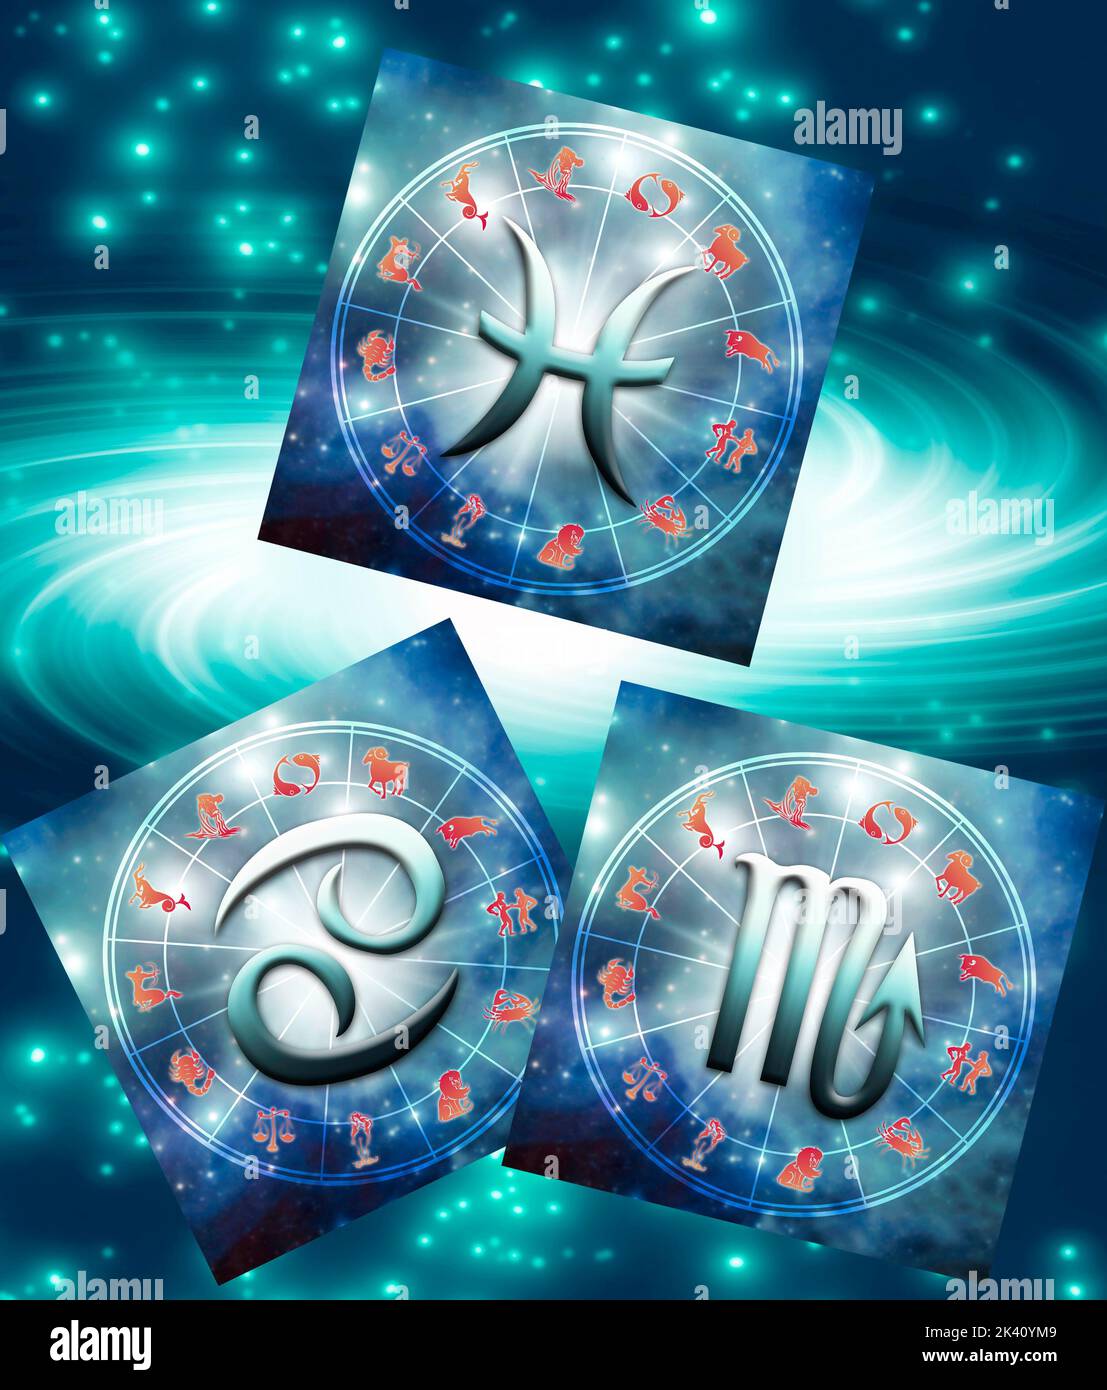 Three zodiac water signs Scorpio, Cancer, Pisces over astrology background with stars Stock Photo